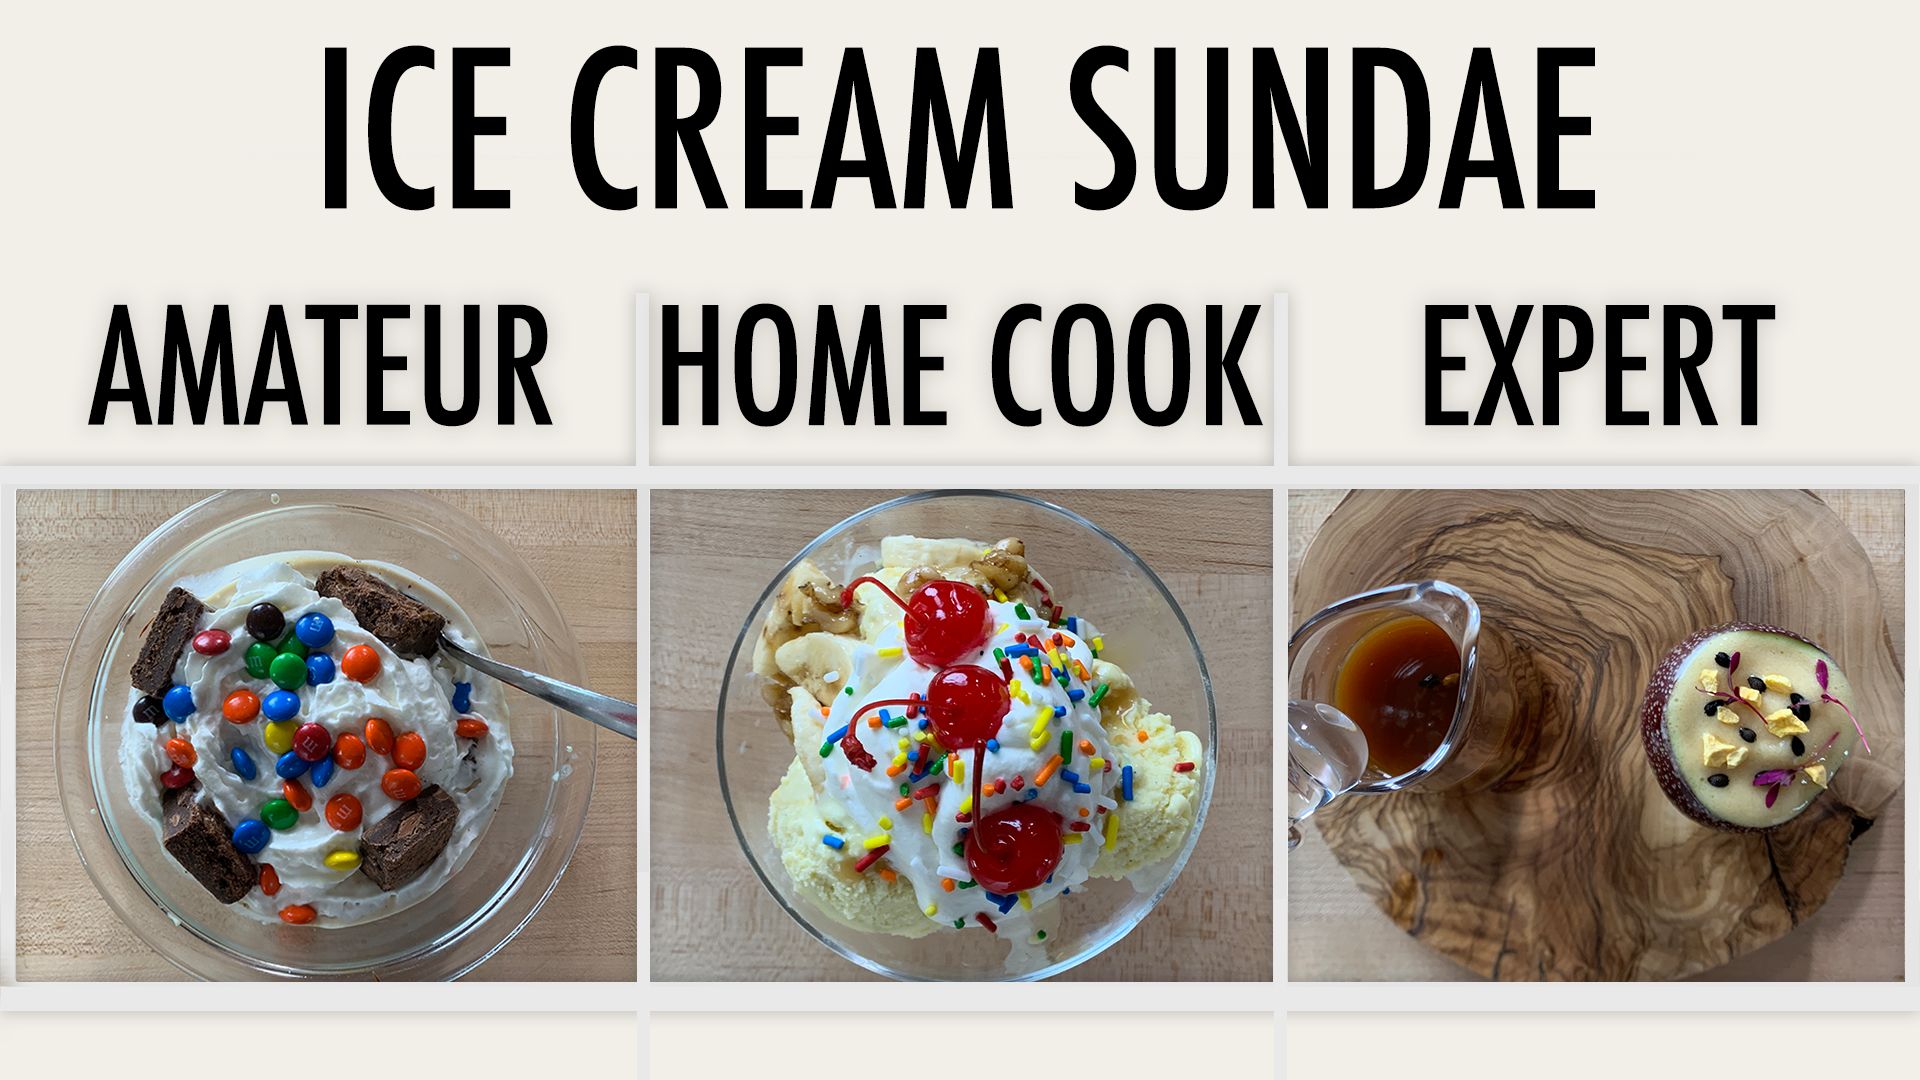 What is your favorite type of flavored syrup to drizzle over your sundae?